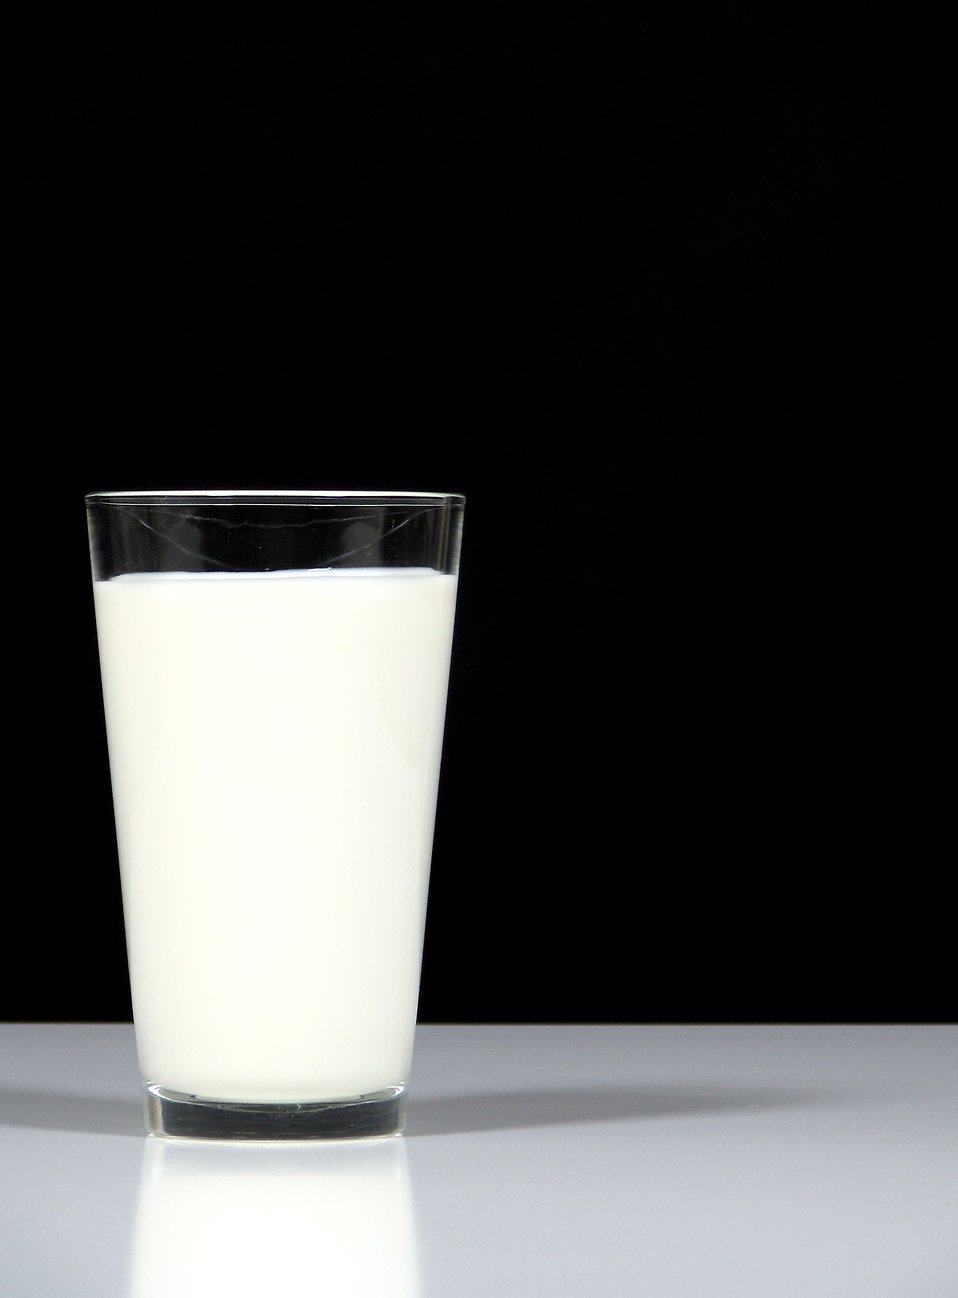 clipart of a glass of milk - photo #48